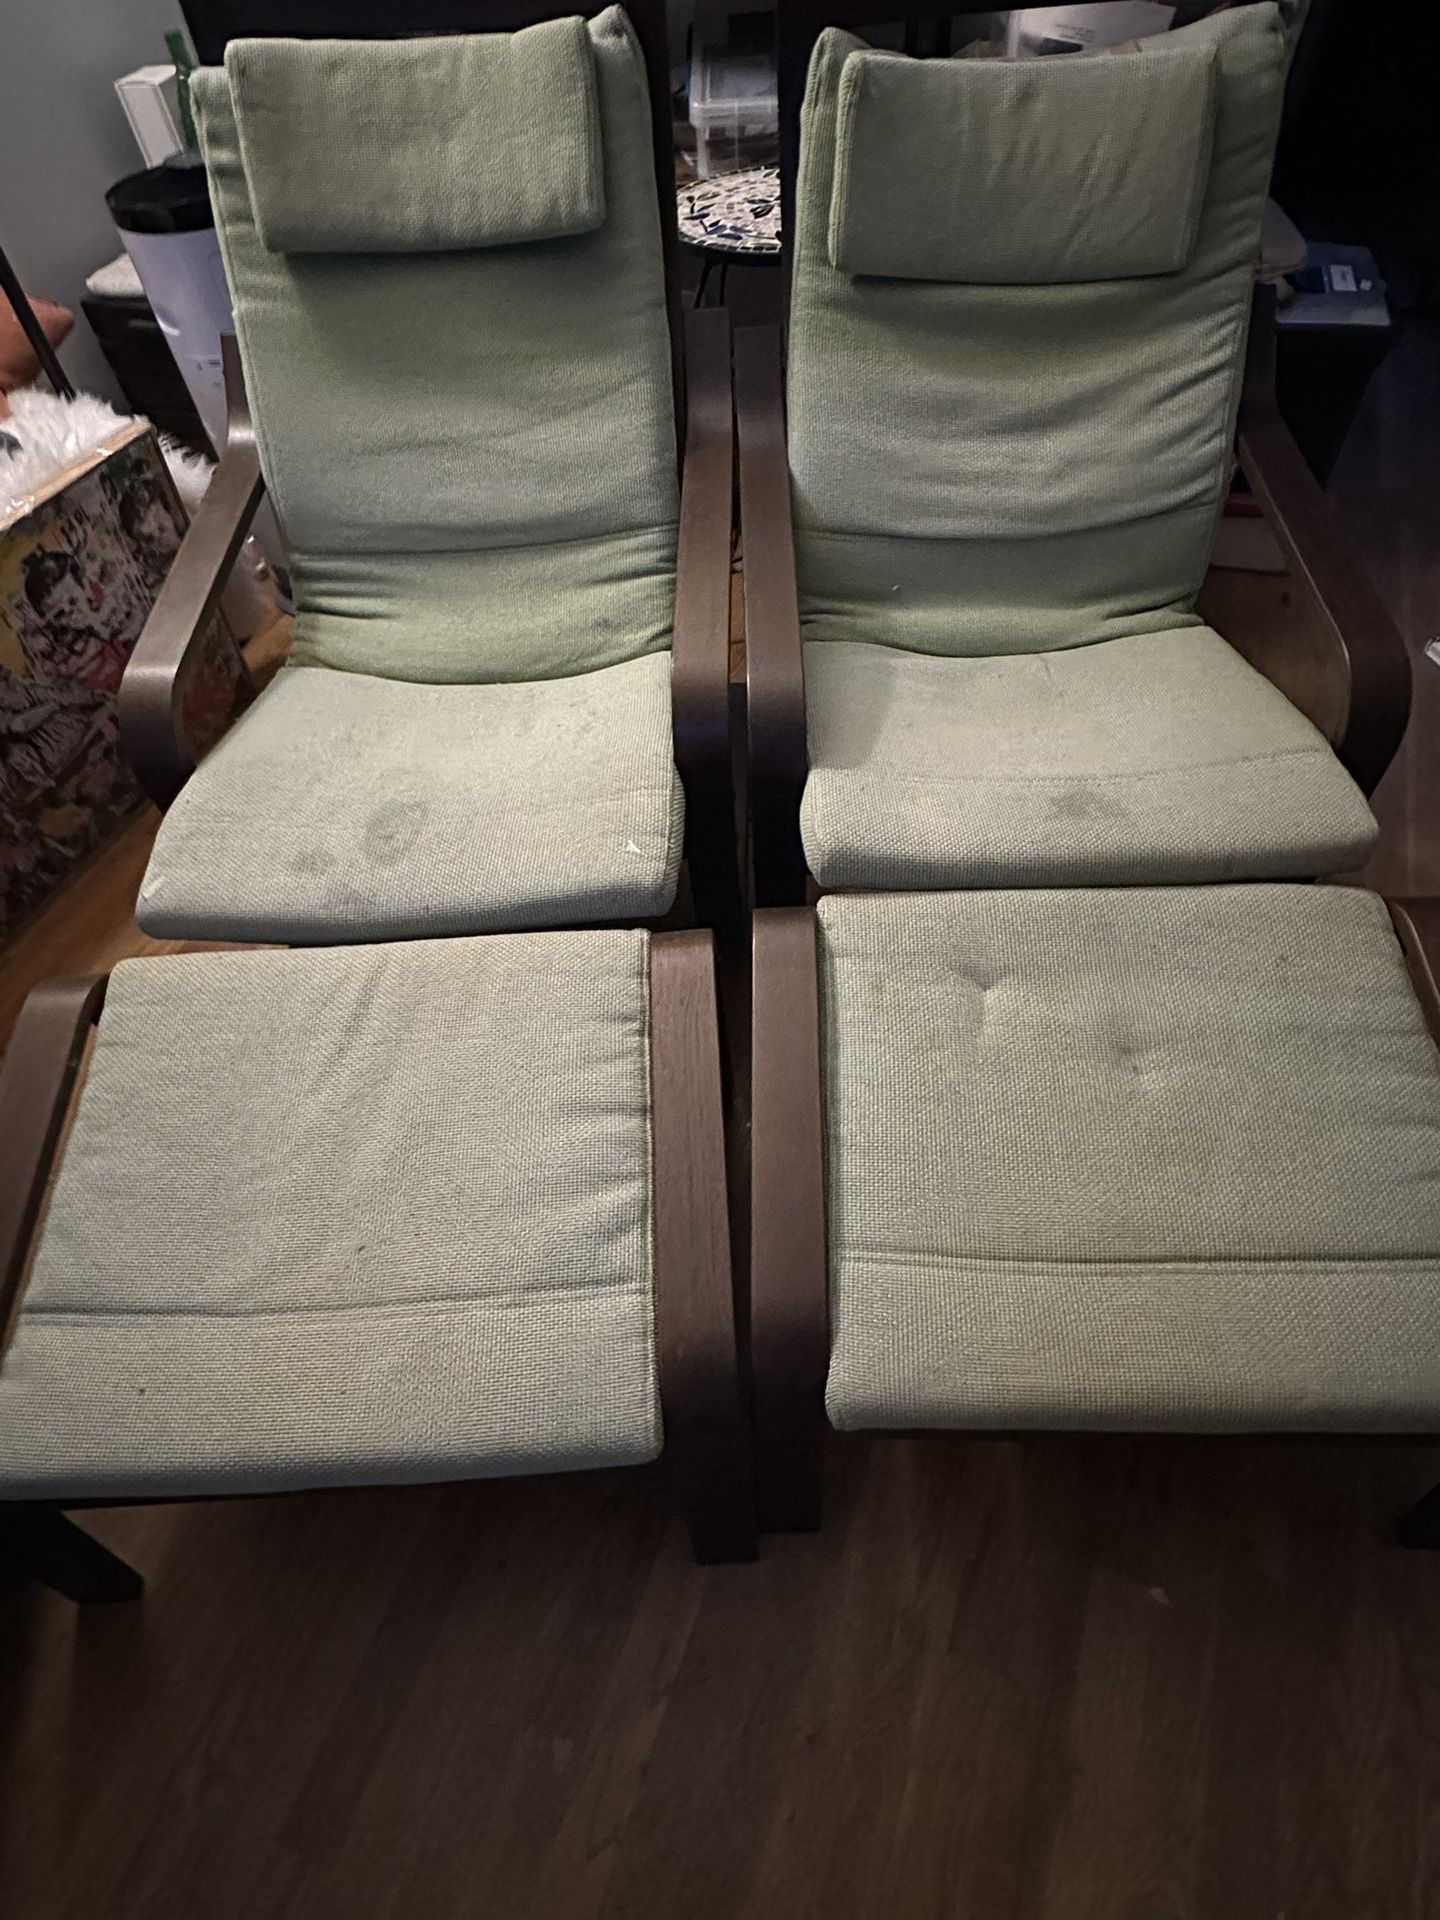 IKEA Poang Chairs And Footstools